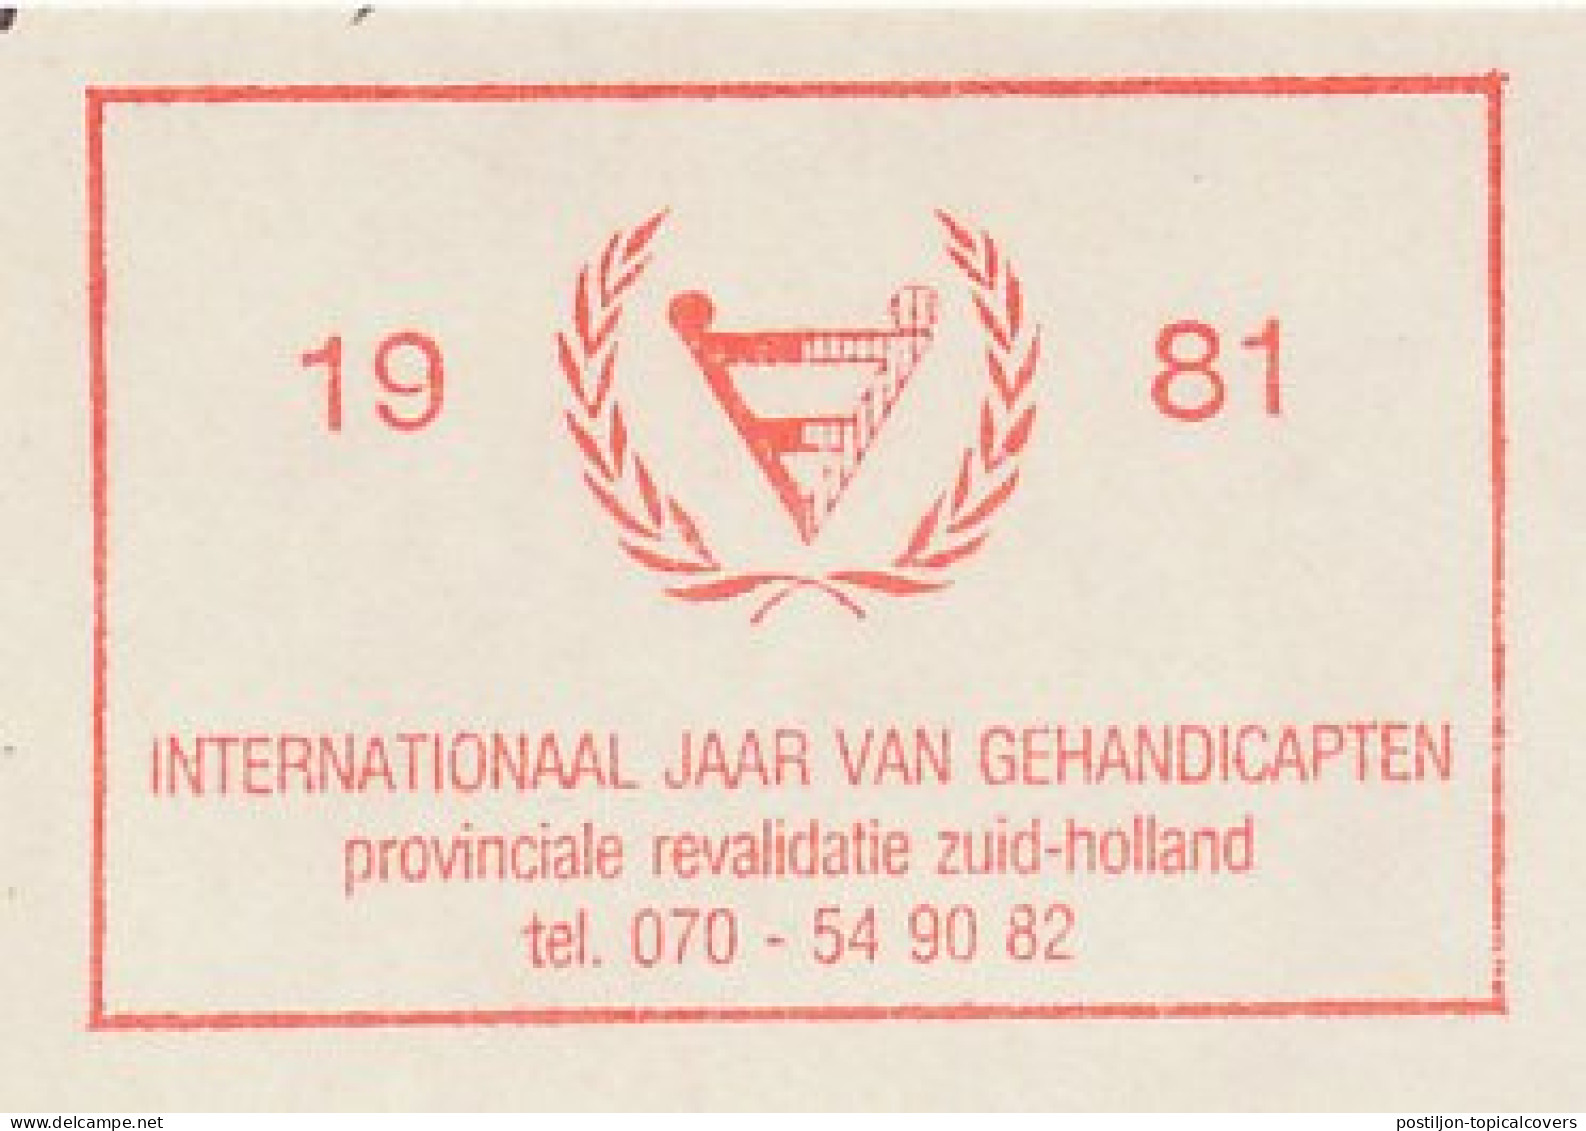 Meter Cut Netherlands 1981 International Year Of Disabled Persons - Handicaps